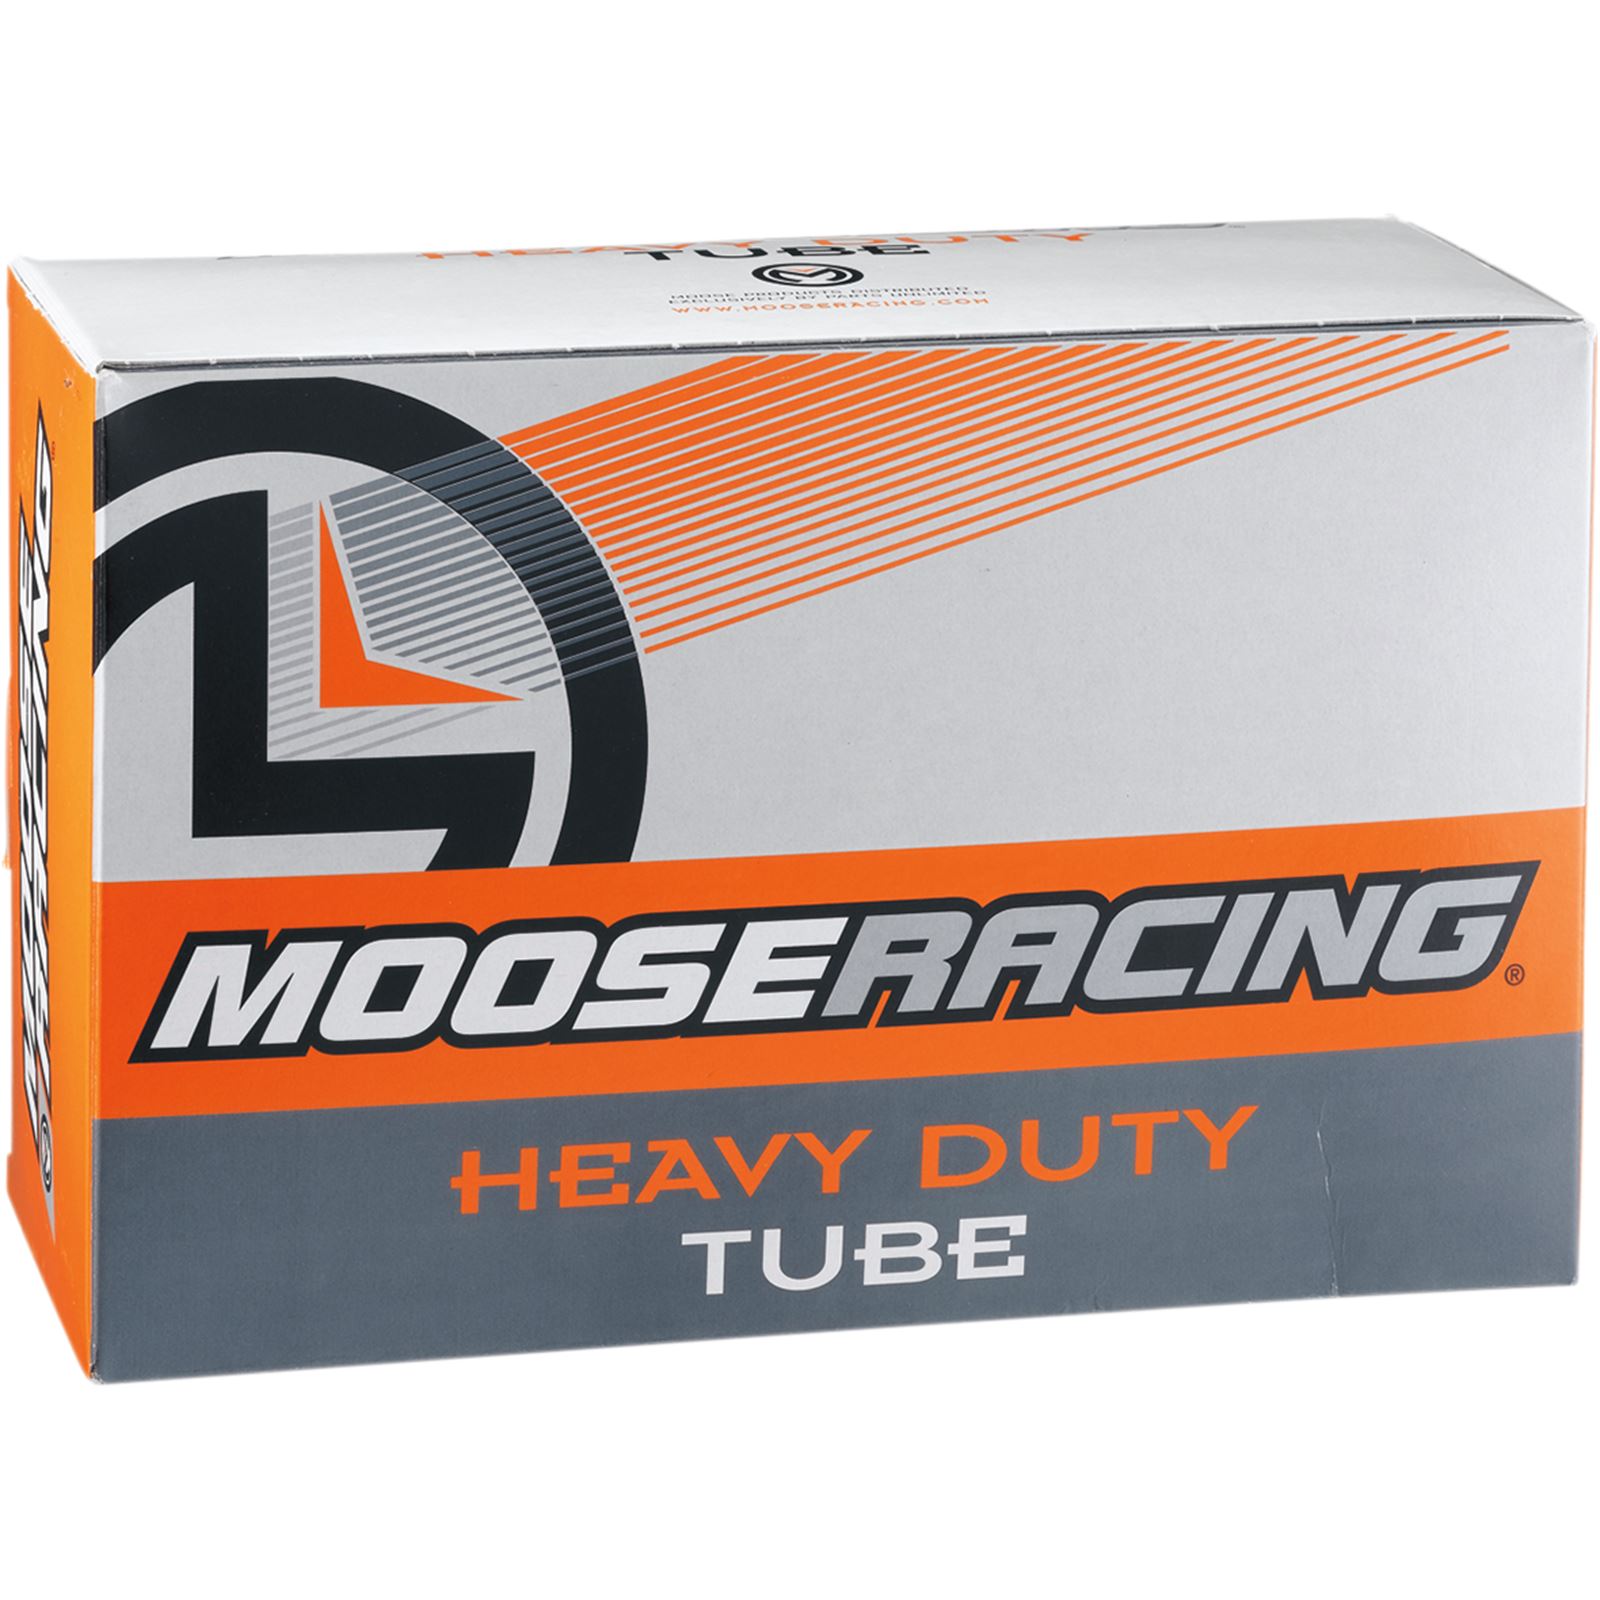 Heavy Duty Mailing/Shipping Tubes - Packaging Price